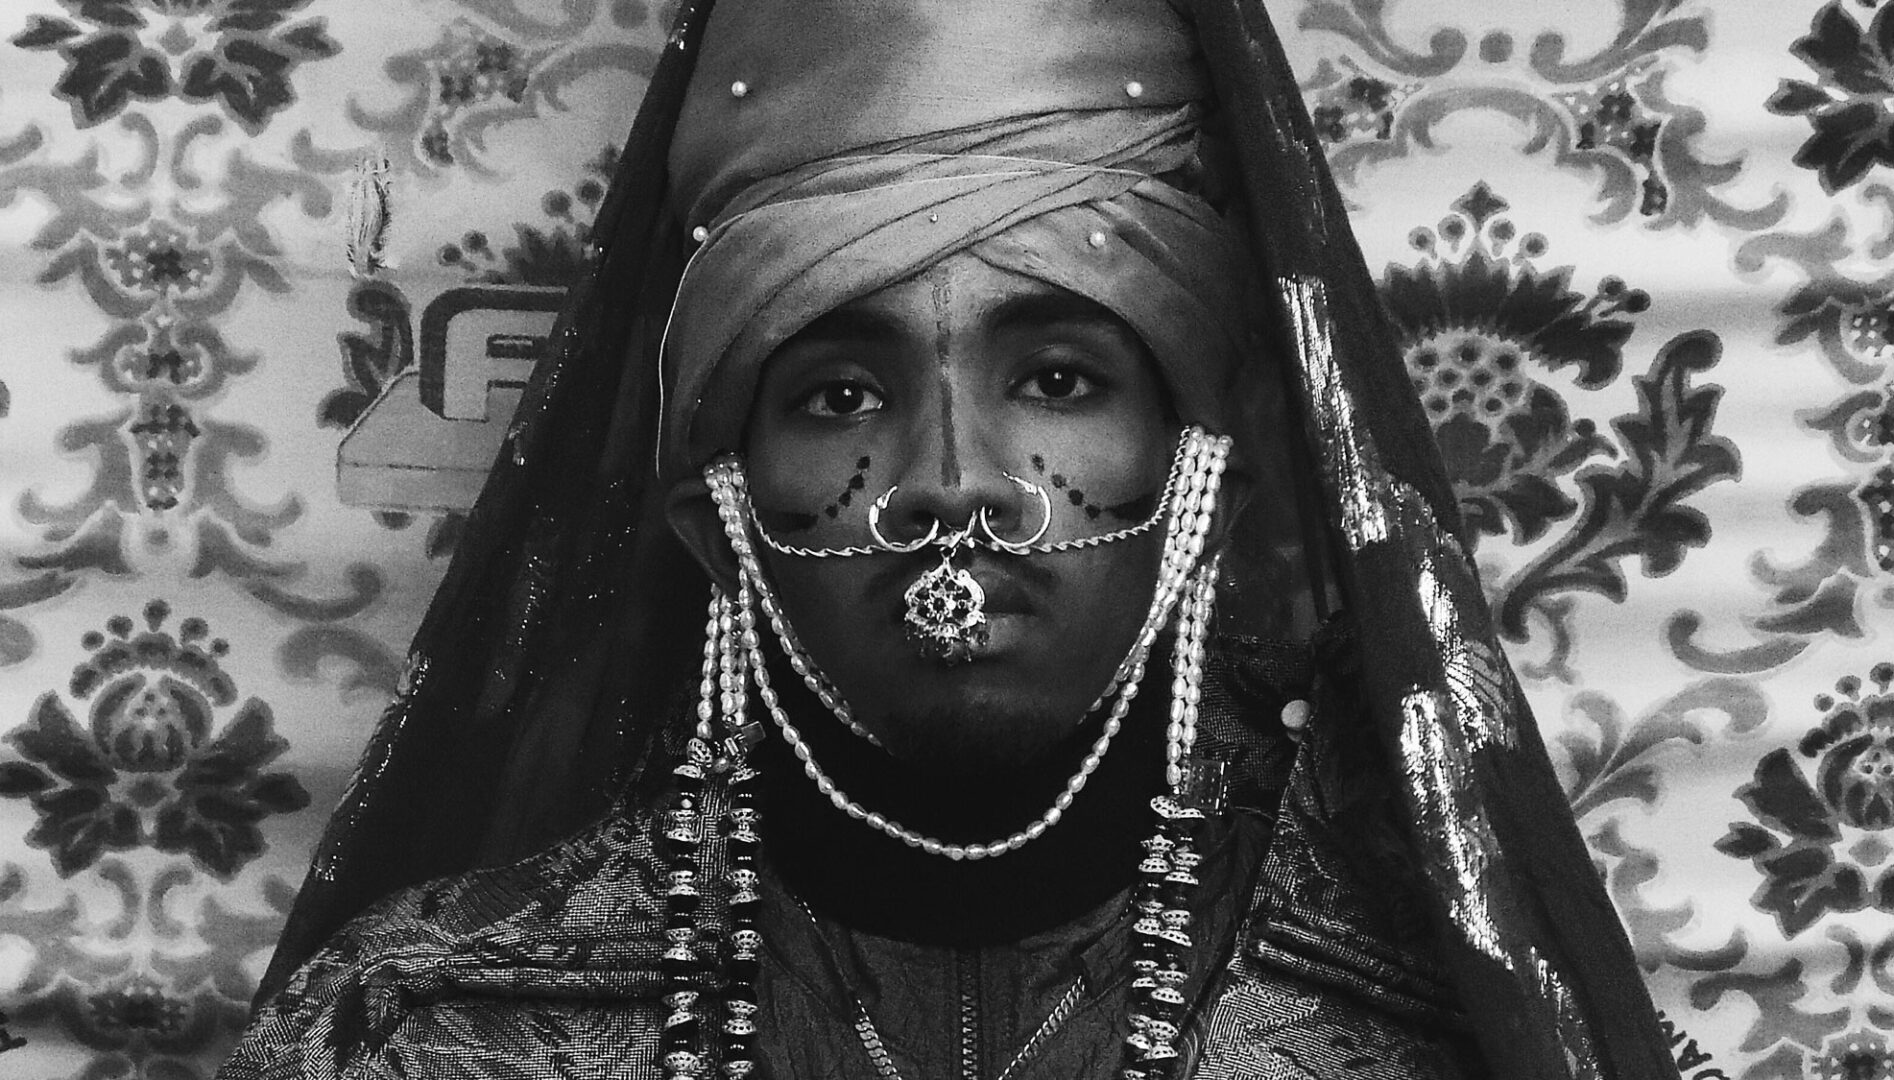 Black and white photograph of a person wearing heavy jewelry and a large head wrap